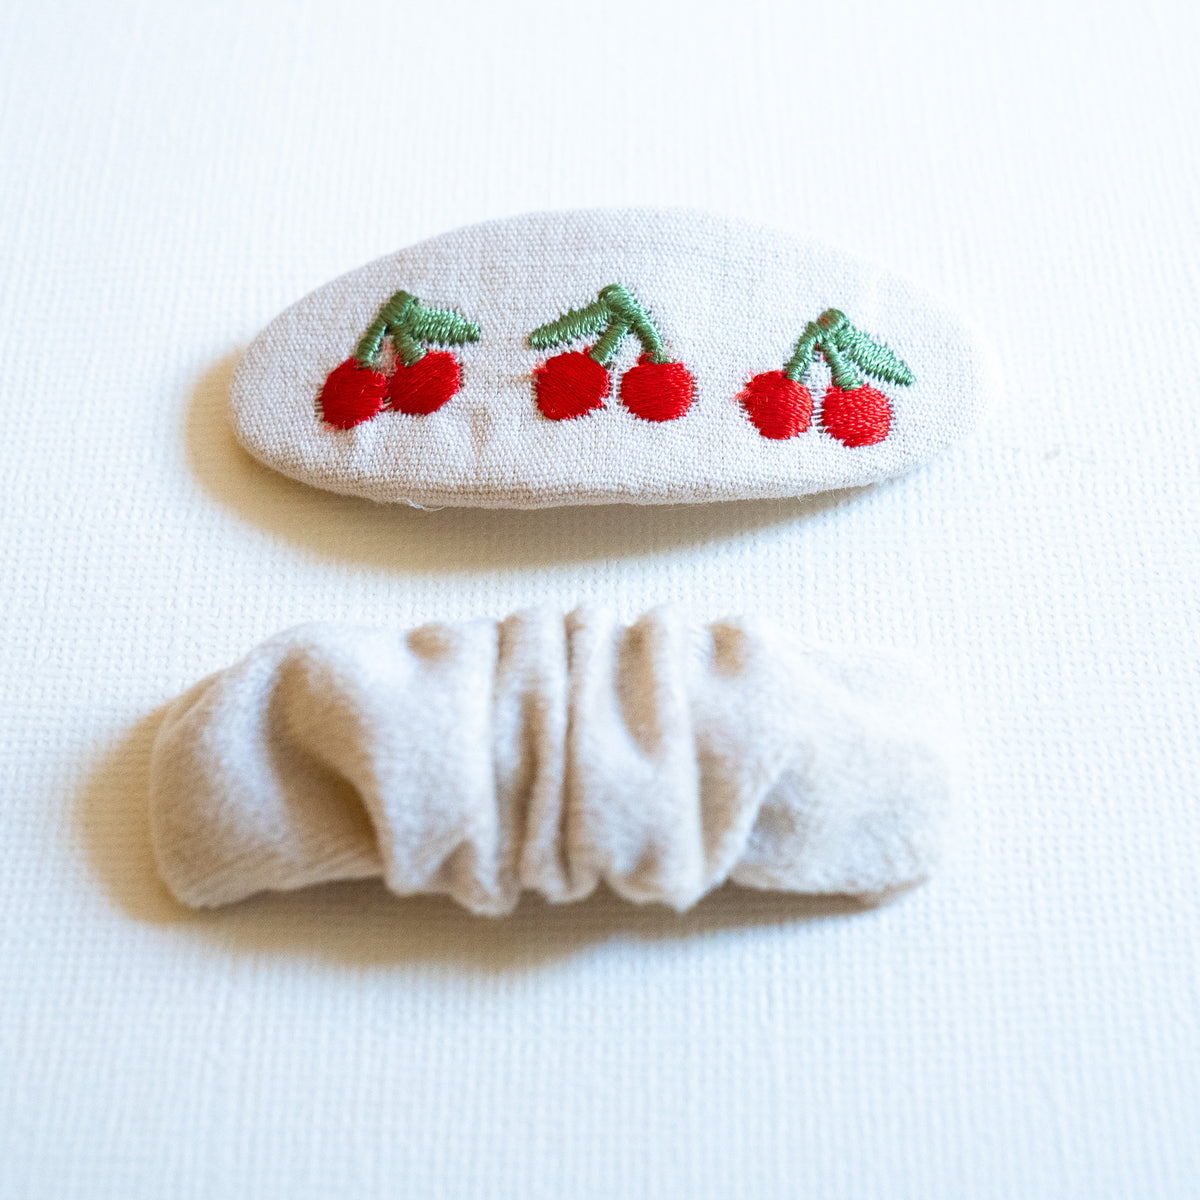 Embroidered Cherry Barrettes